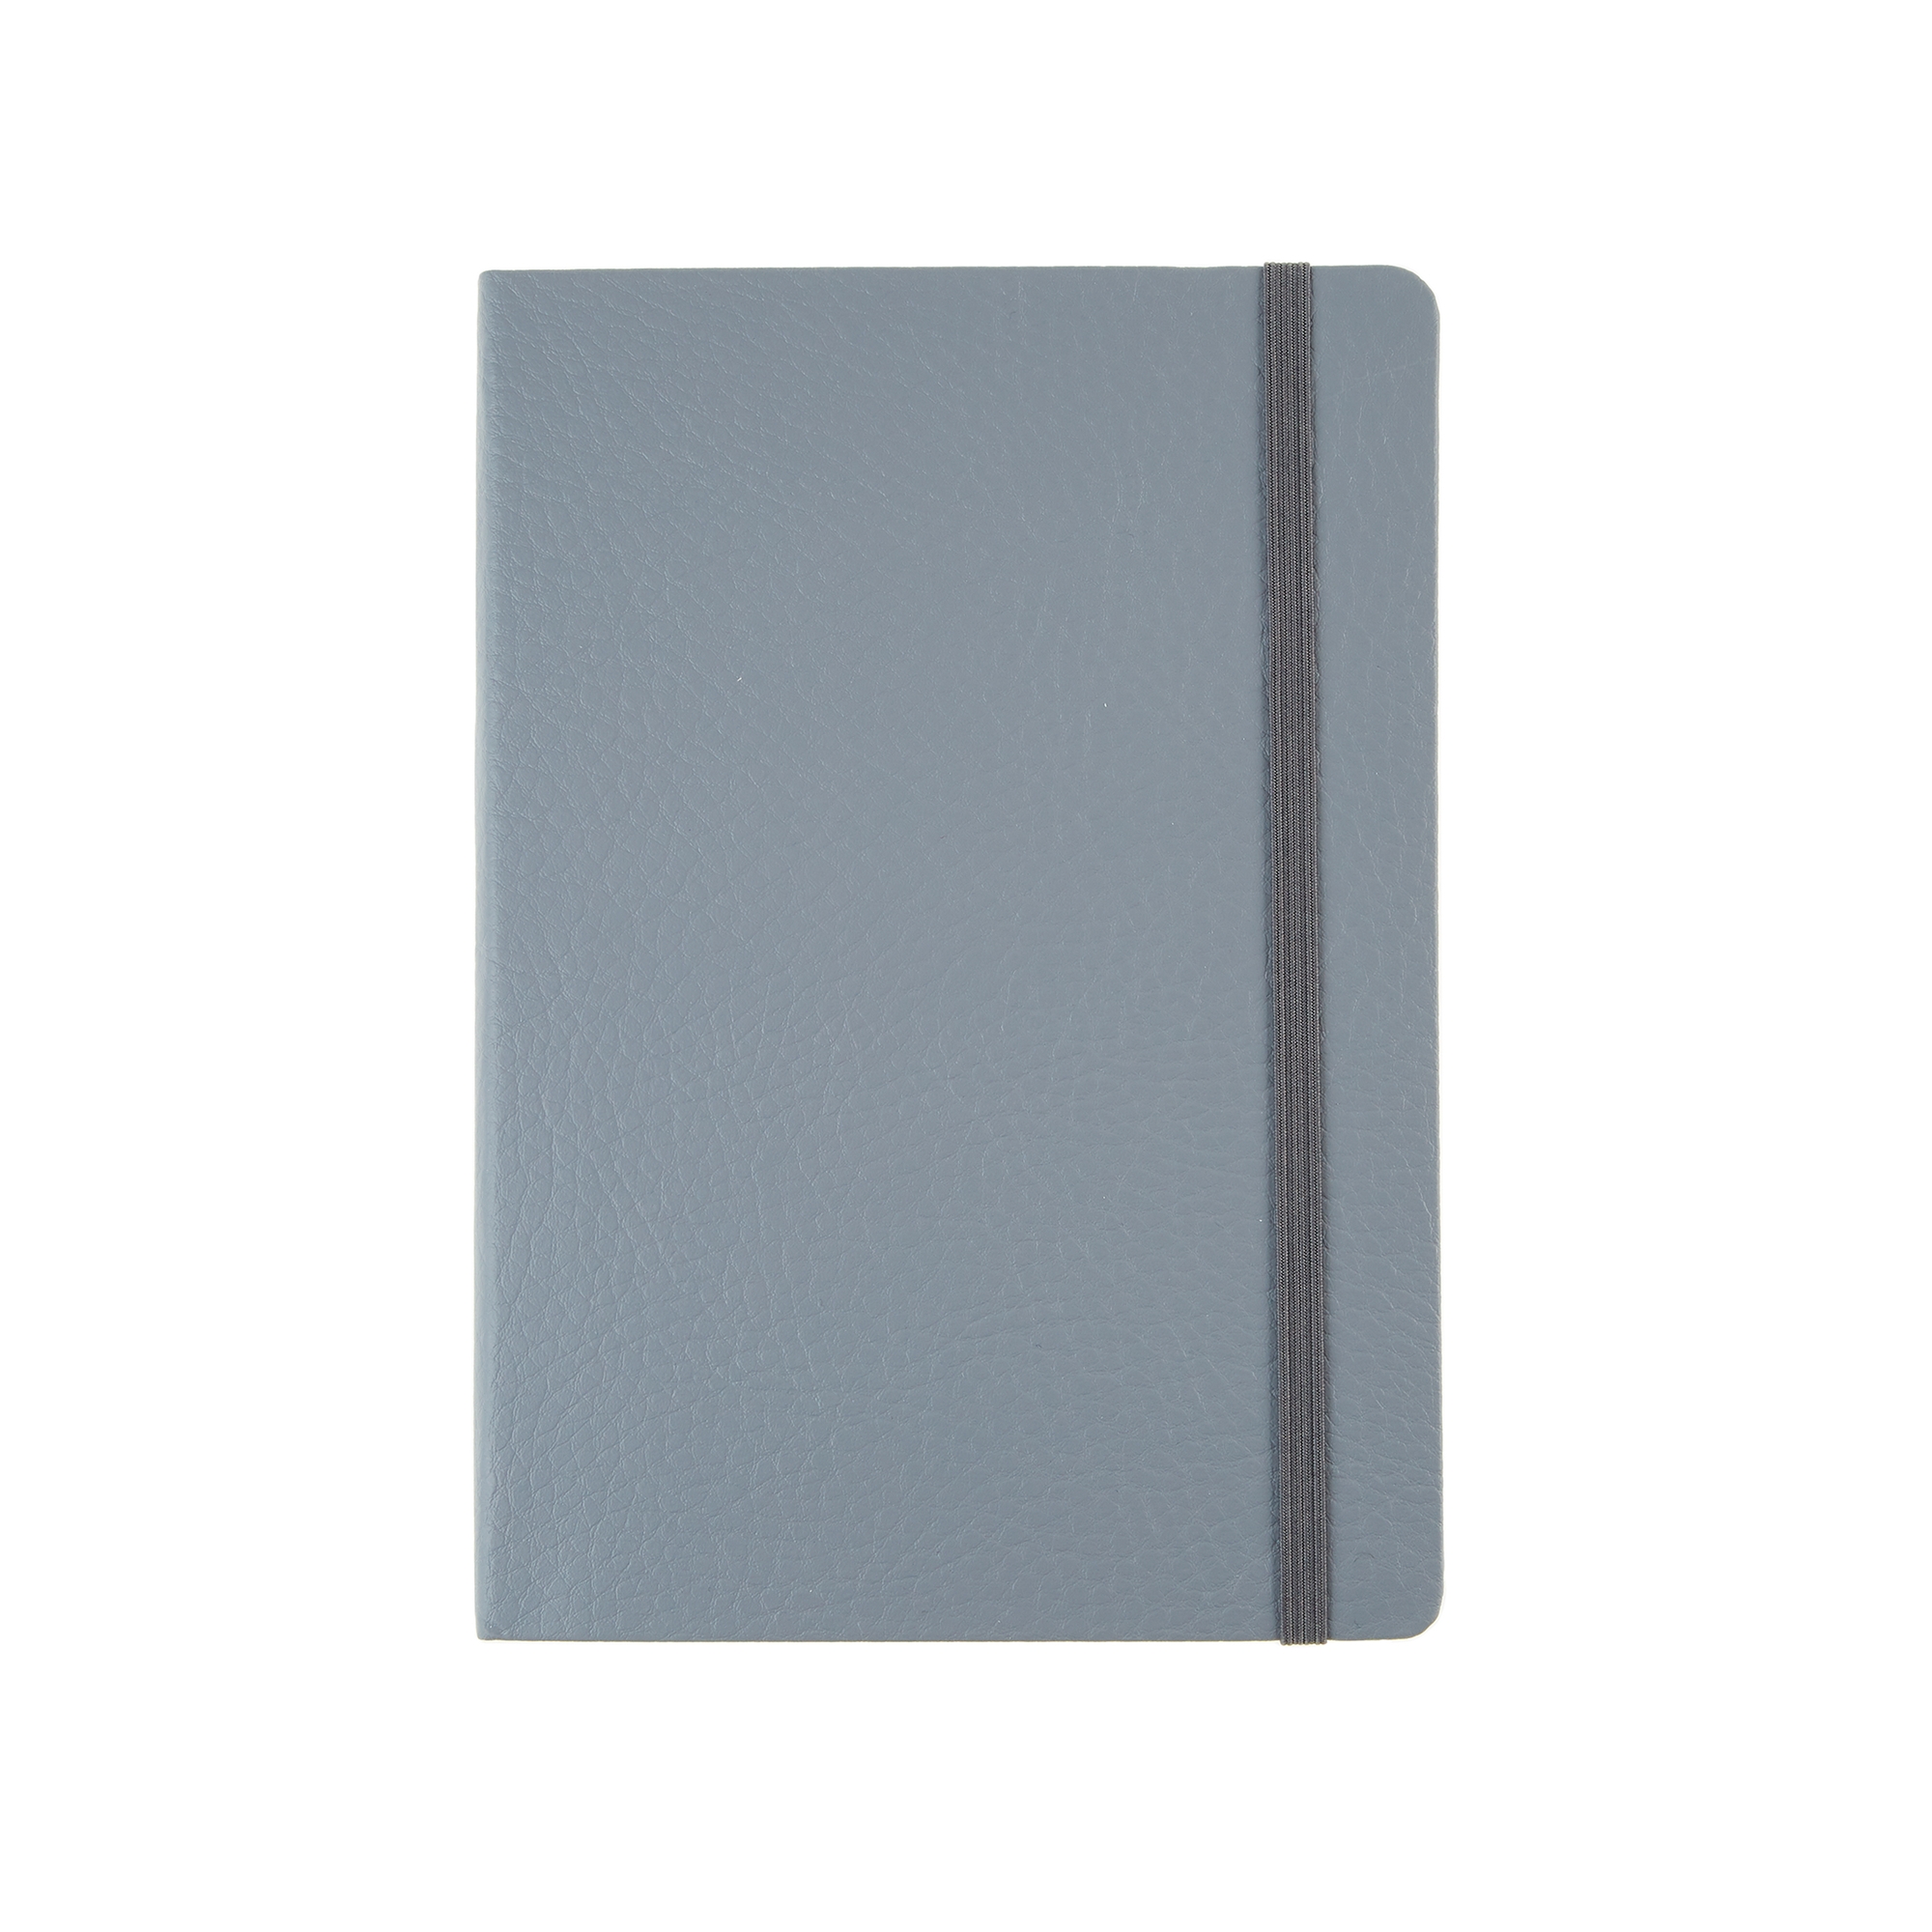 Collins B6 Ruled Notebook - Steel